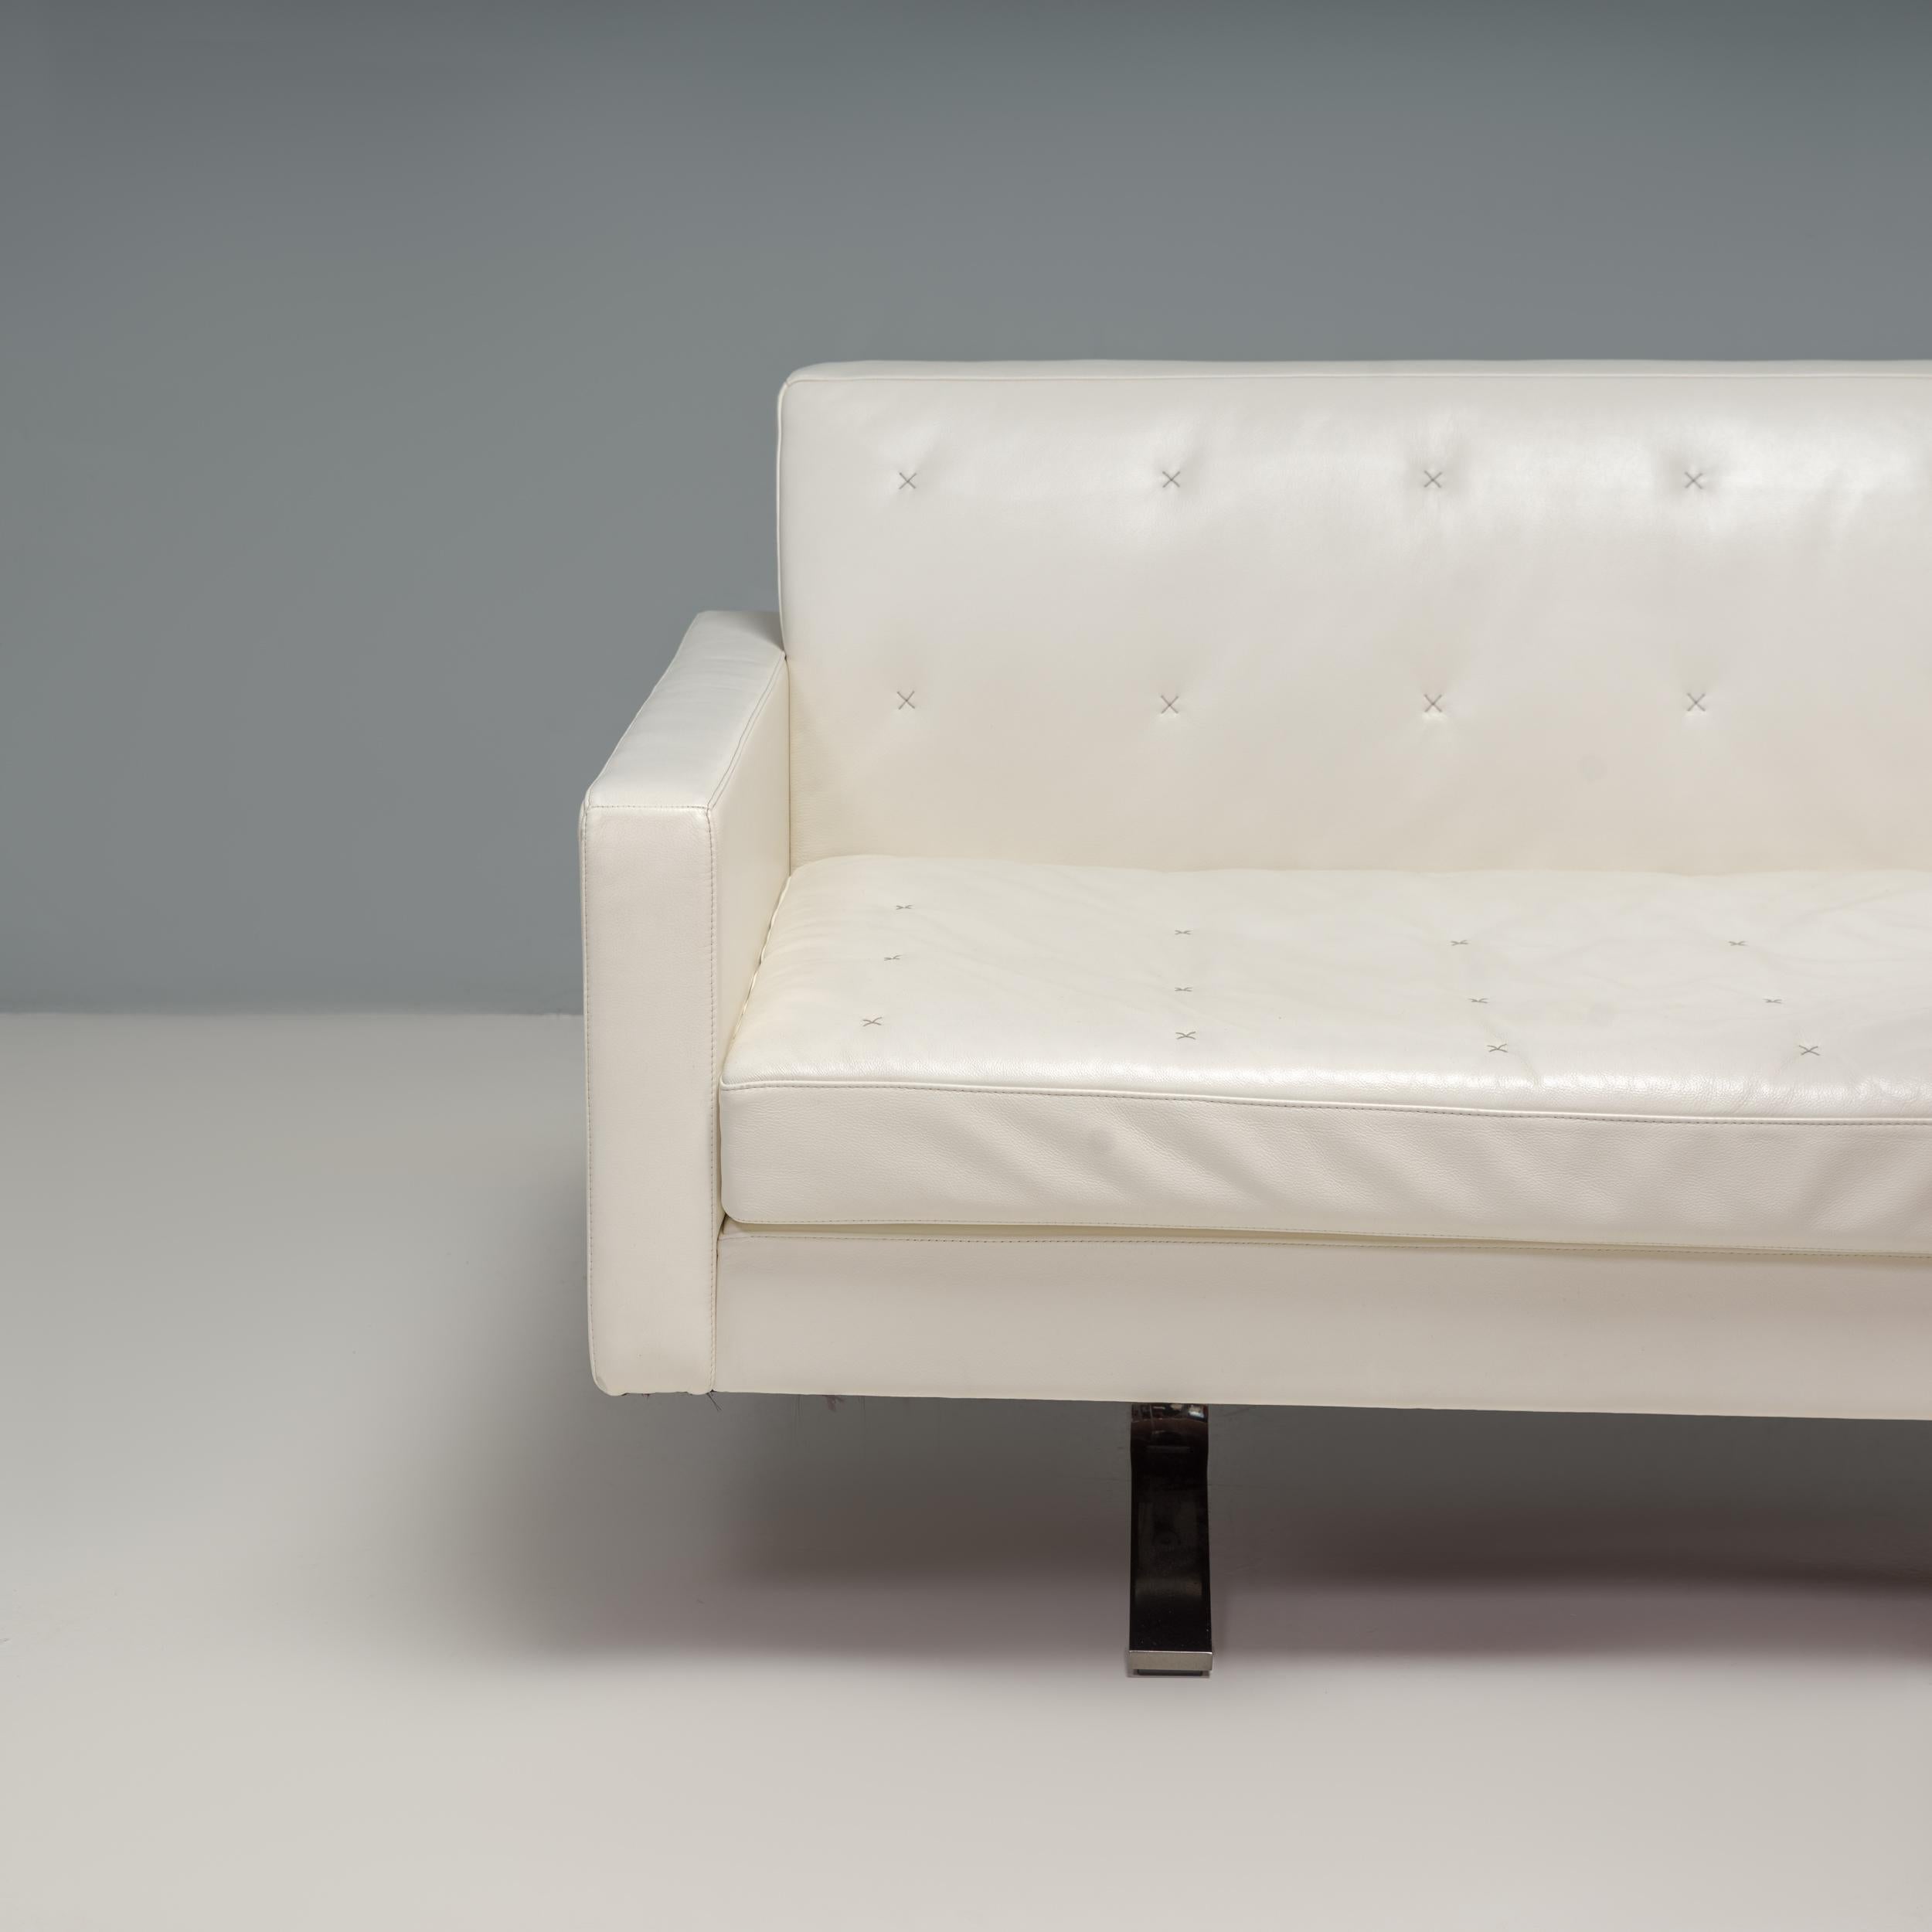 Poltrona Frau by Jean-Marie Massaud Cream Leather Kennedee Sofa In Good Condition For Sale In London, GB